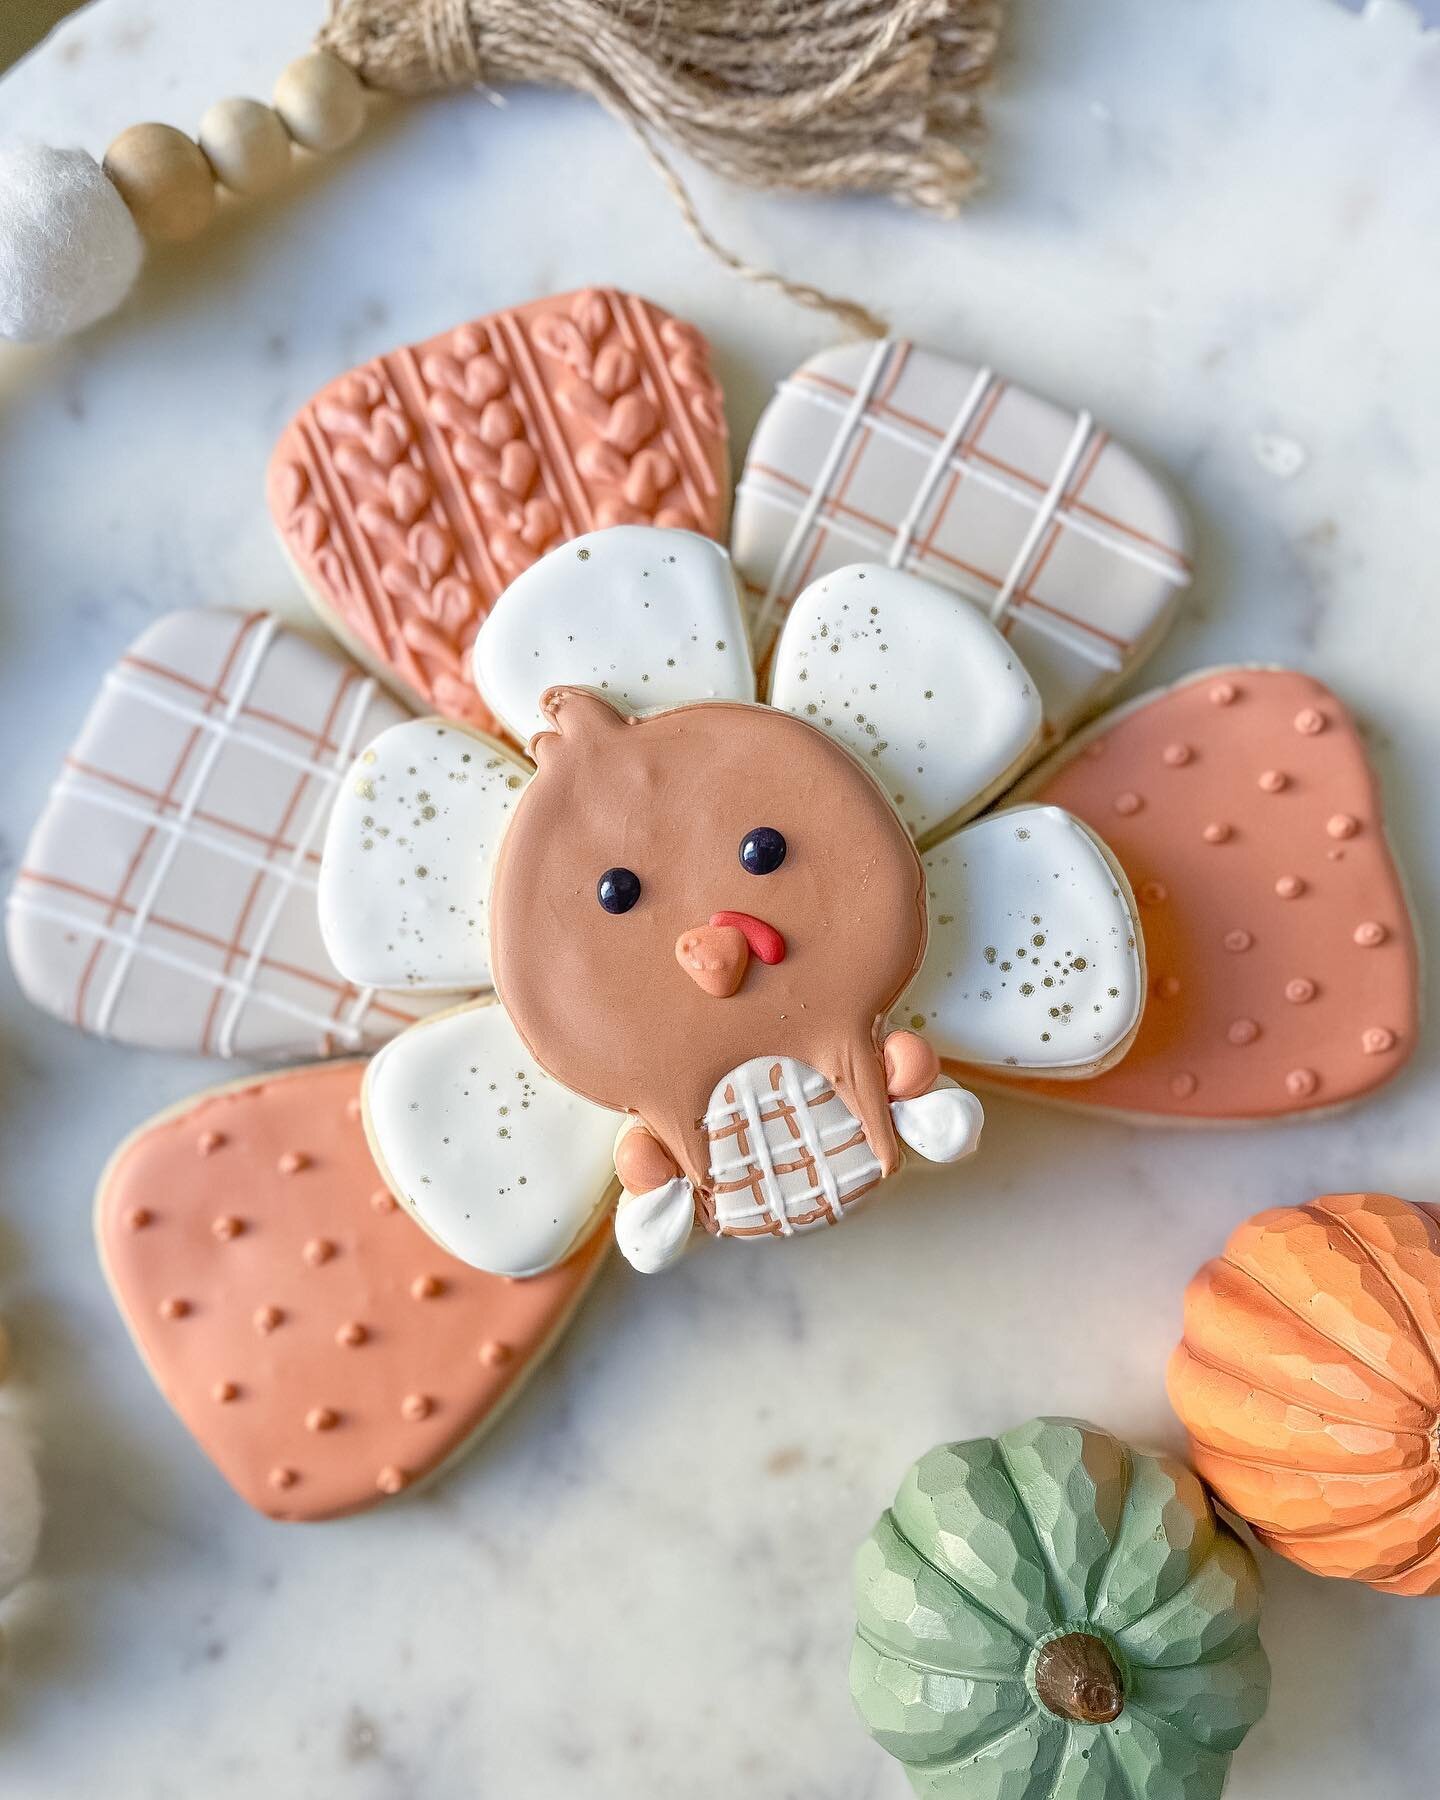 Turkey cookies &gt;&gt;&gt; Turkey. Am I right?! Snag this cute Turkey platter for your Thanksgiving table on my website courtscookieco.com

Pickup 11/23 

#Customcookies #customcookie #royalicing #royalicingcookies #courtscookieco #cookies #sugarcoo